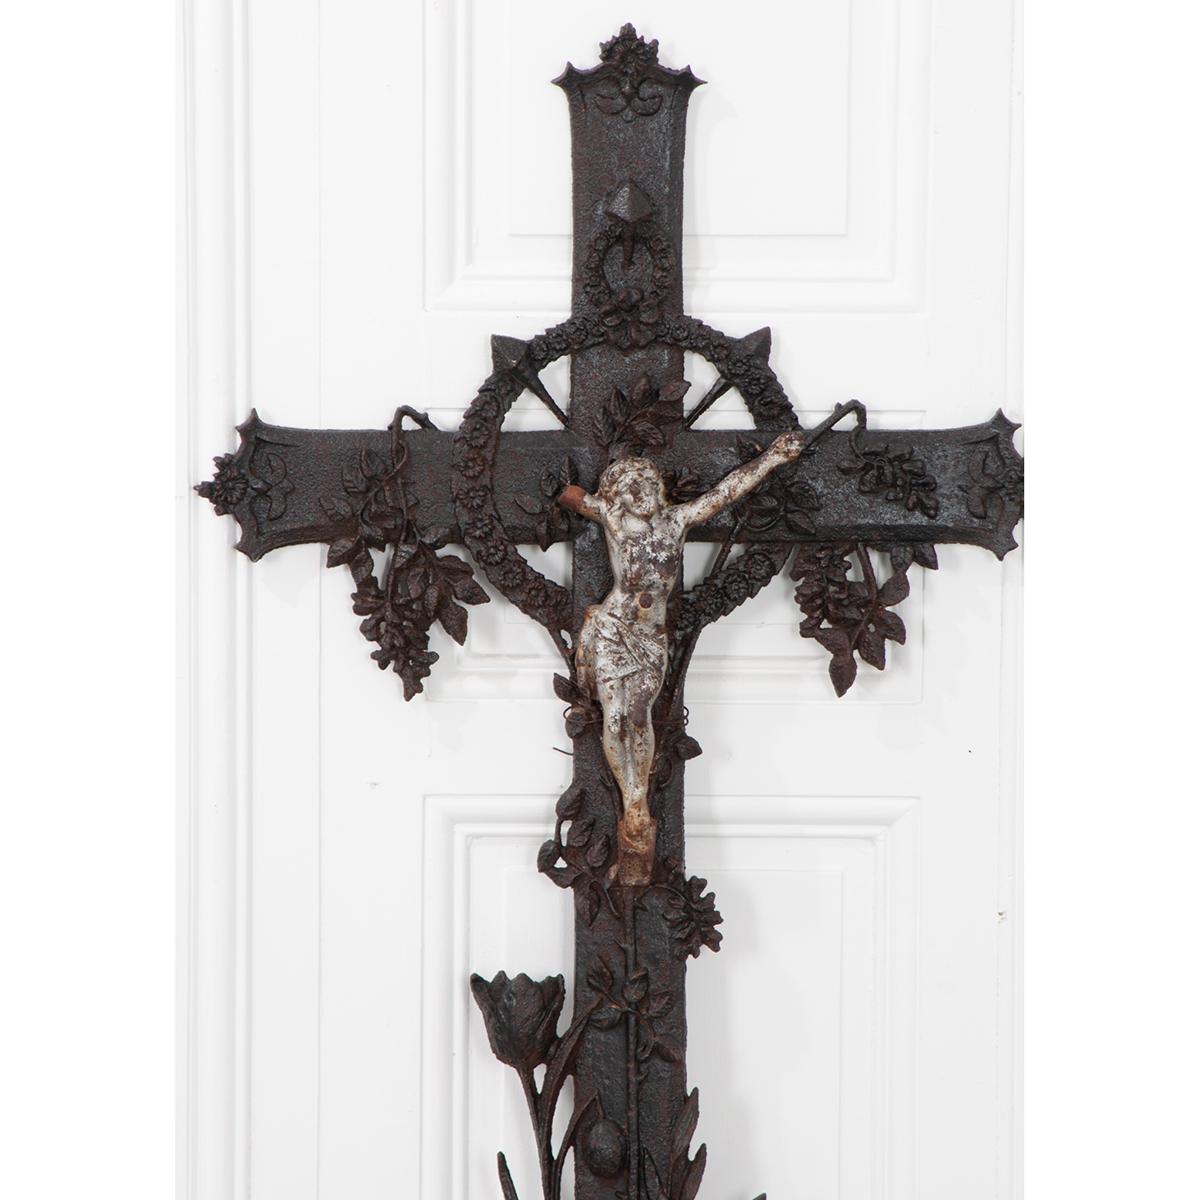 This is a French 19th century cast iron cross with a crucifix. It uses flowers as its decorative motif. These crosses were often used at a grave site or in a field of crops.